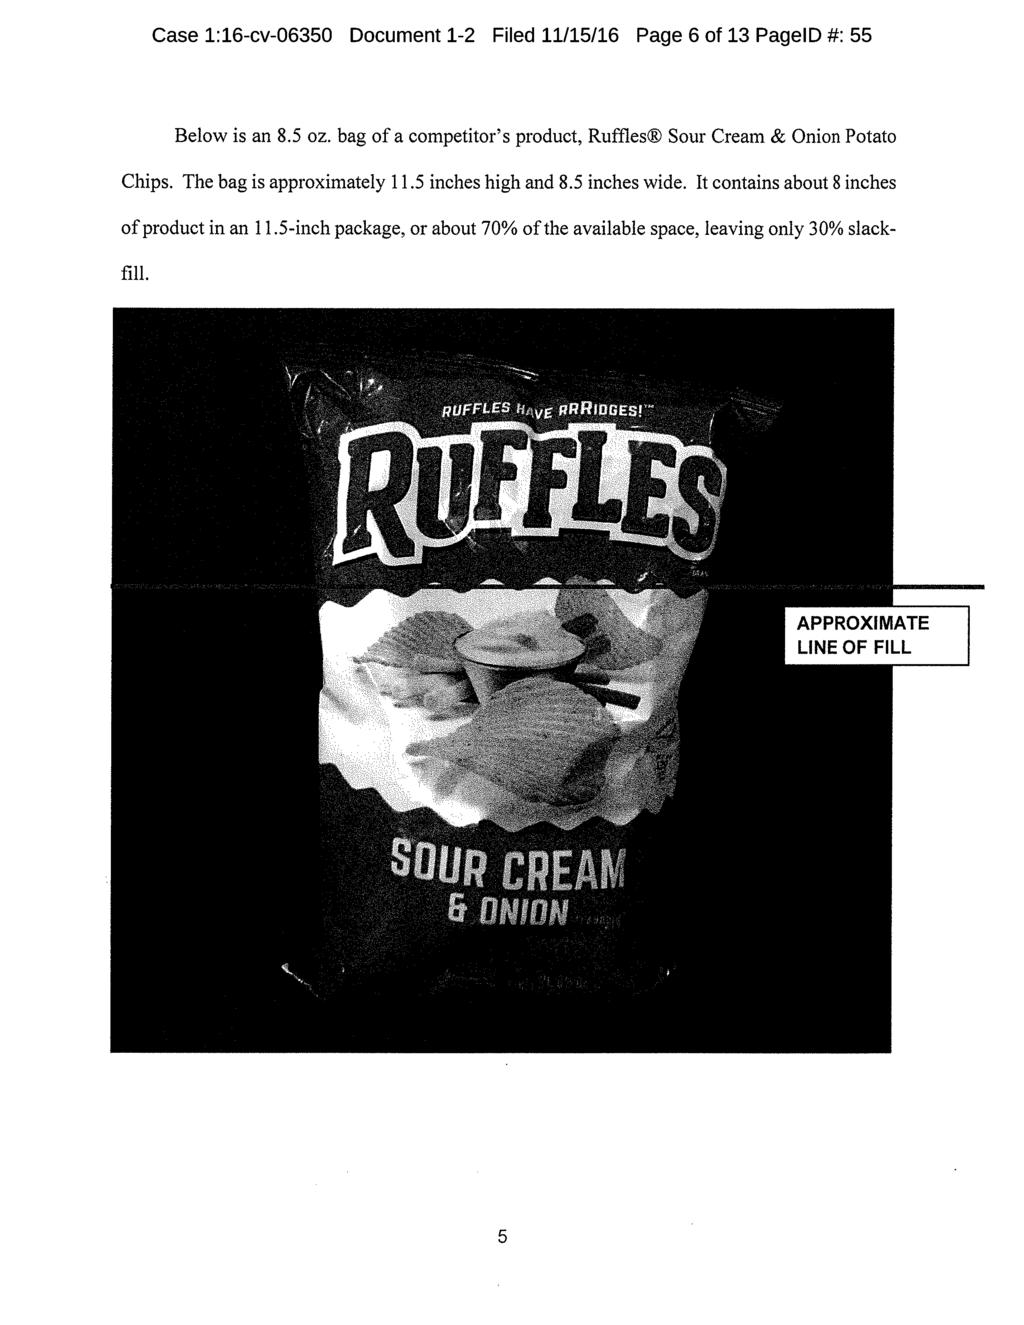 Case 1:16-cv-06350 Document 1-2 Filed 11/15/16 Page 6 of 13 PagelD 55 Below is an 8.5 oz. bag of a competitor's product, Ruffles Sour Cream & Onion Potato Chips. The bag is approximately 11.